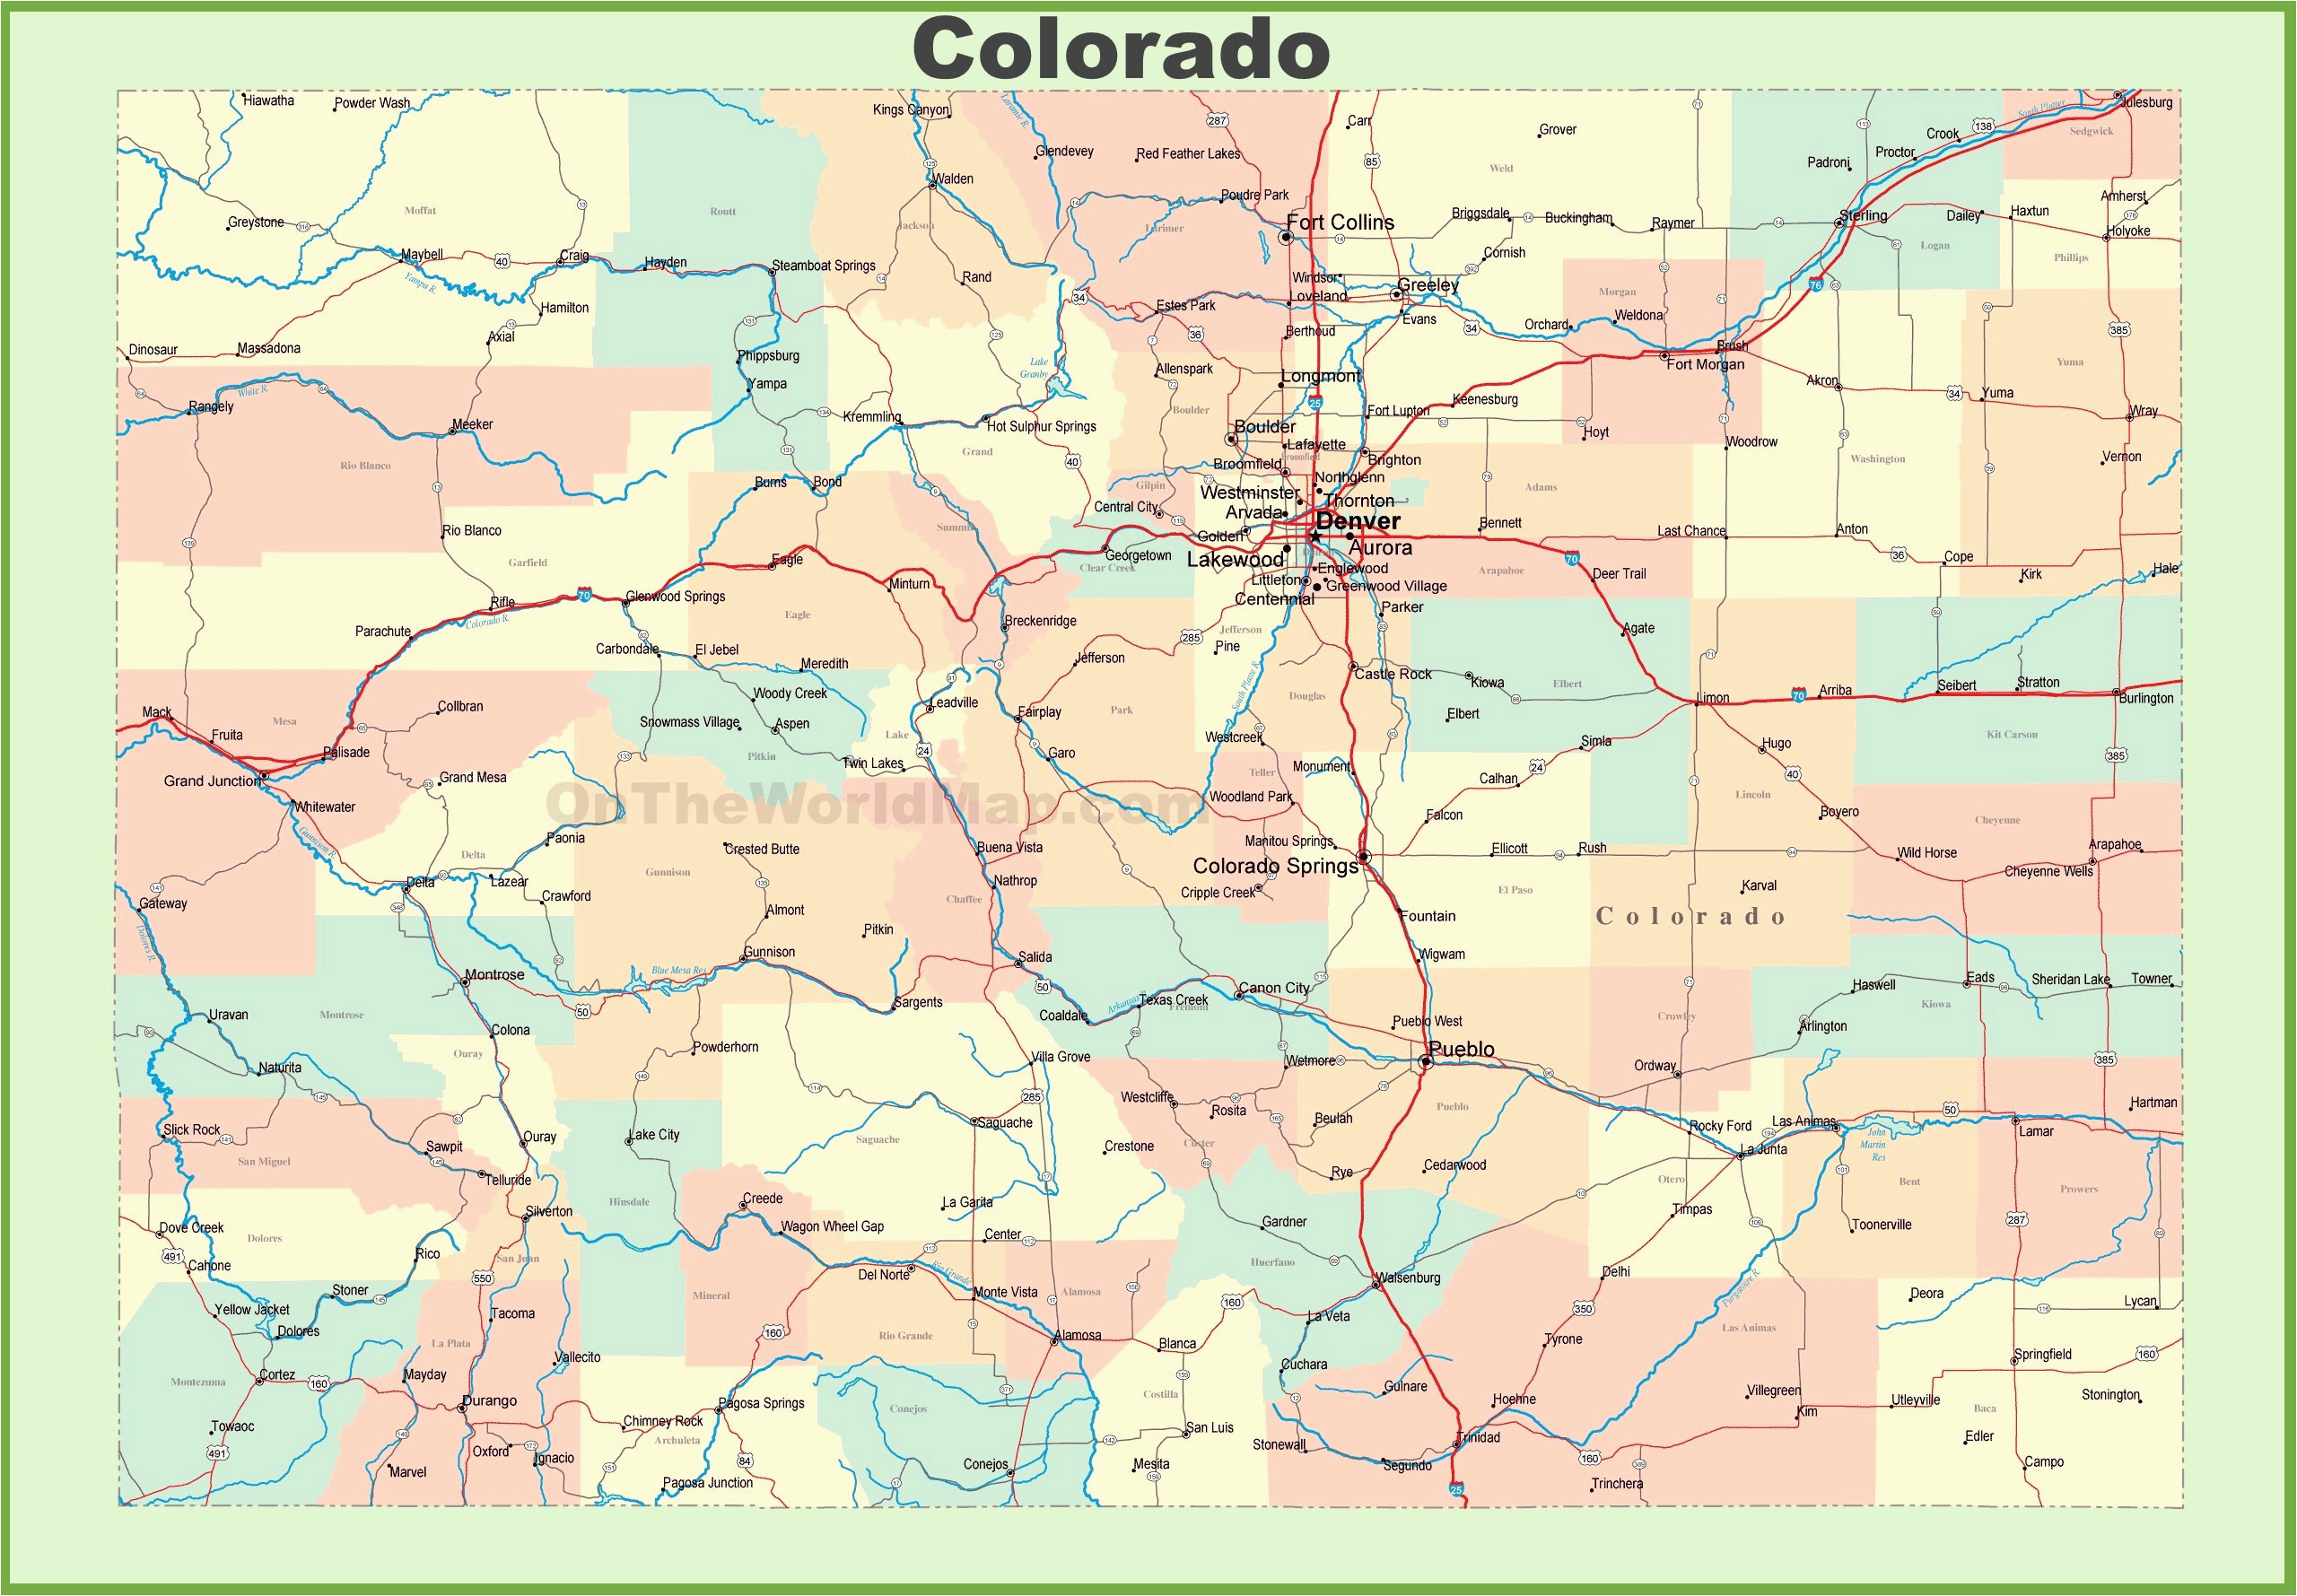 highway map of usa colorado county map with highways valid boulder